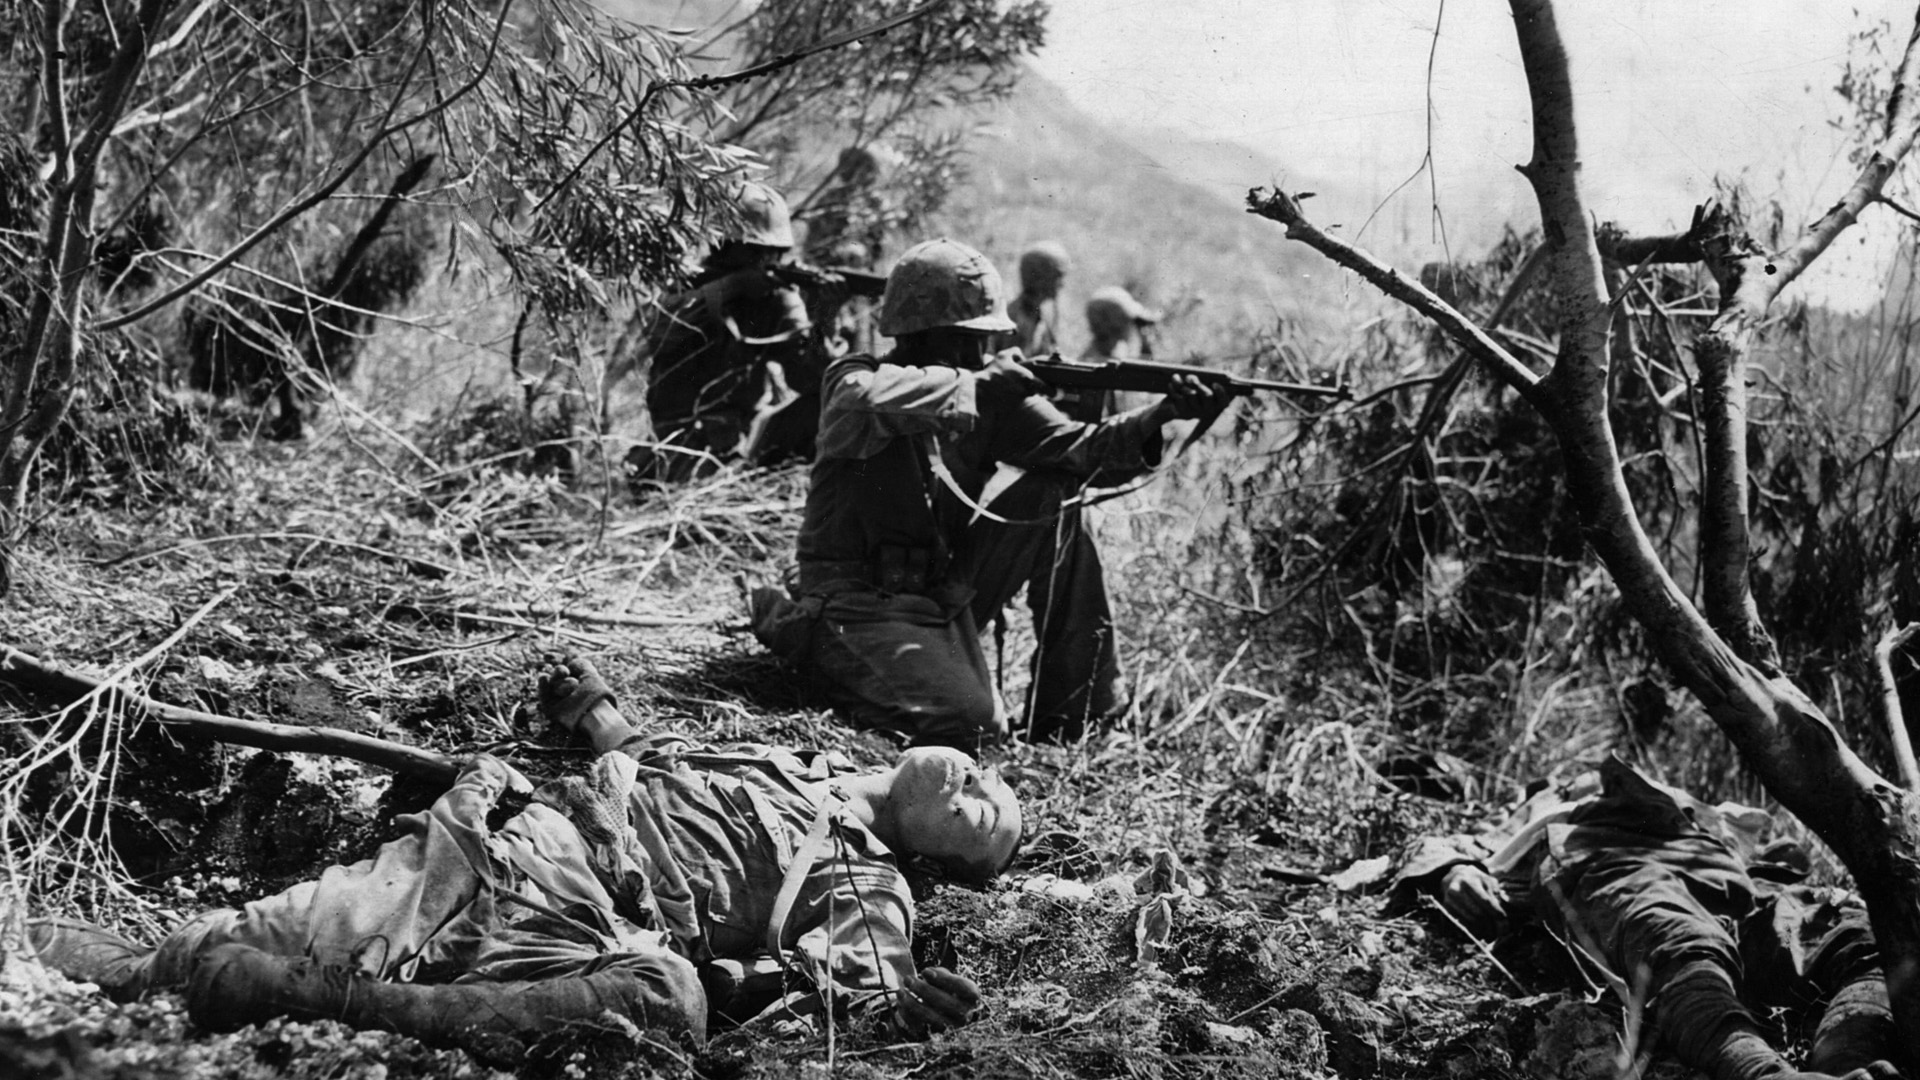 Amid the bodies of dead Japanese soldiers, a Marine of the U.S. 2nd Division raises his M1 carbine to take aim at the retiring enemy on Saipan during the advance on Mount Marpi. The bitter battle for Saipan resulted in heavy casualties for both sides.